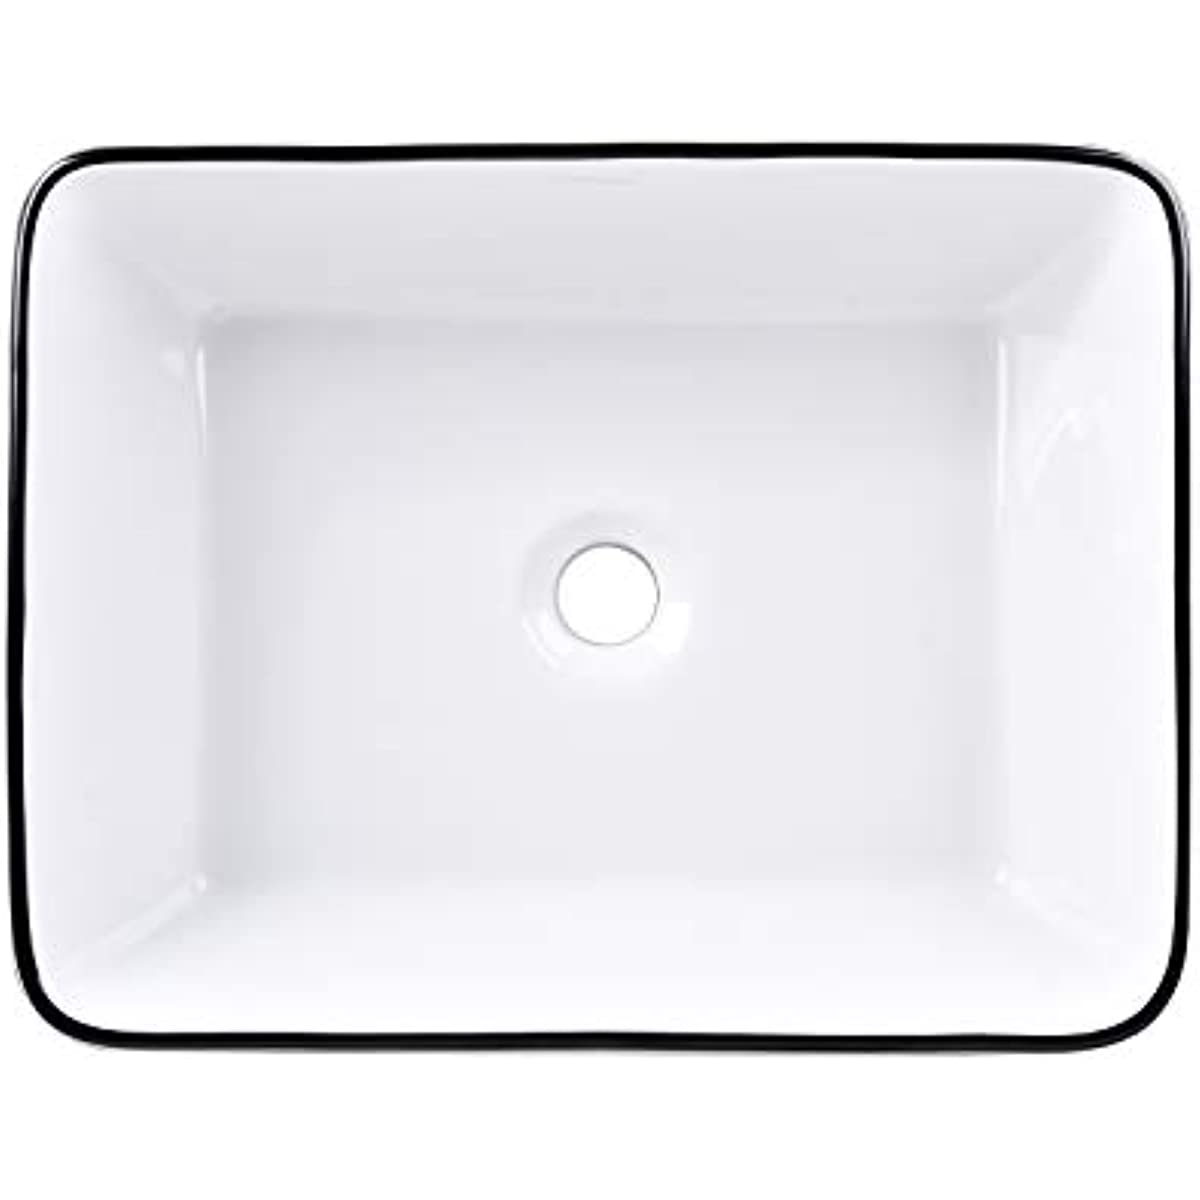 Above view of Elecwish white ceramic sink without faucet and pop-up drain